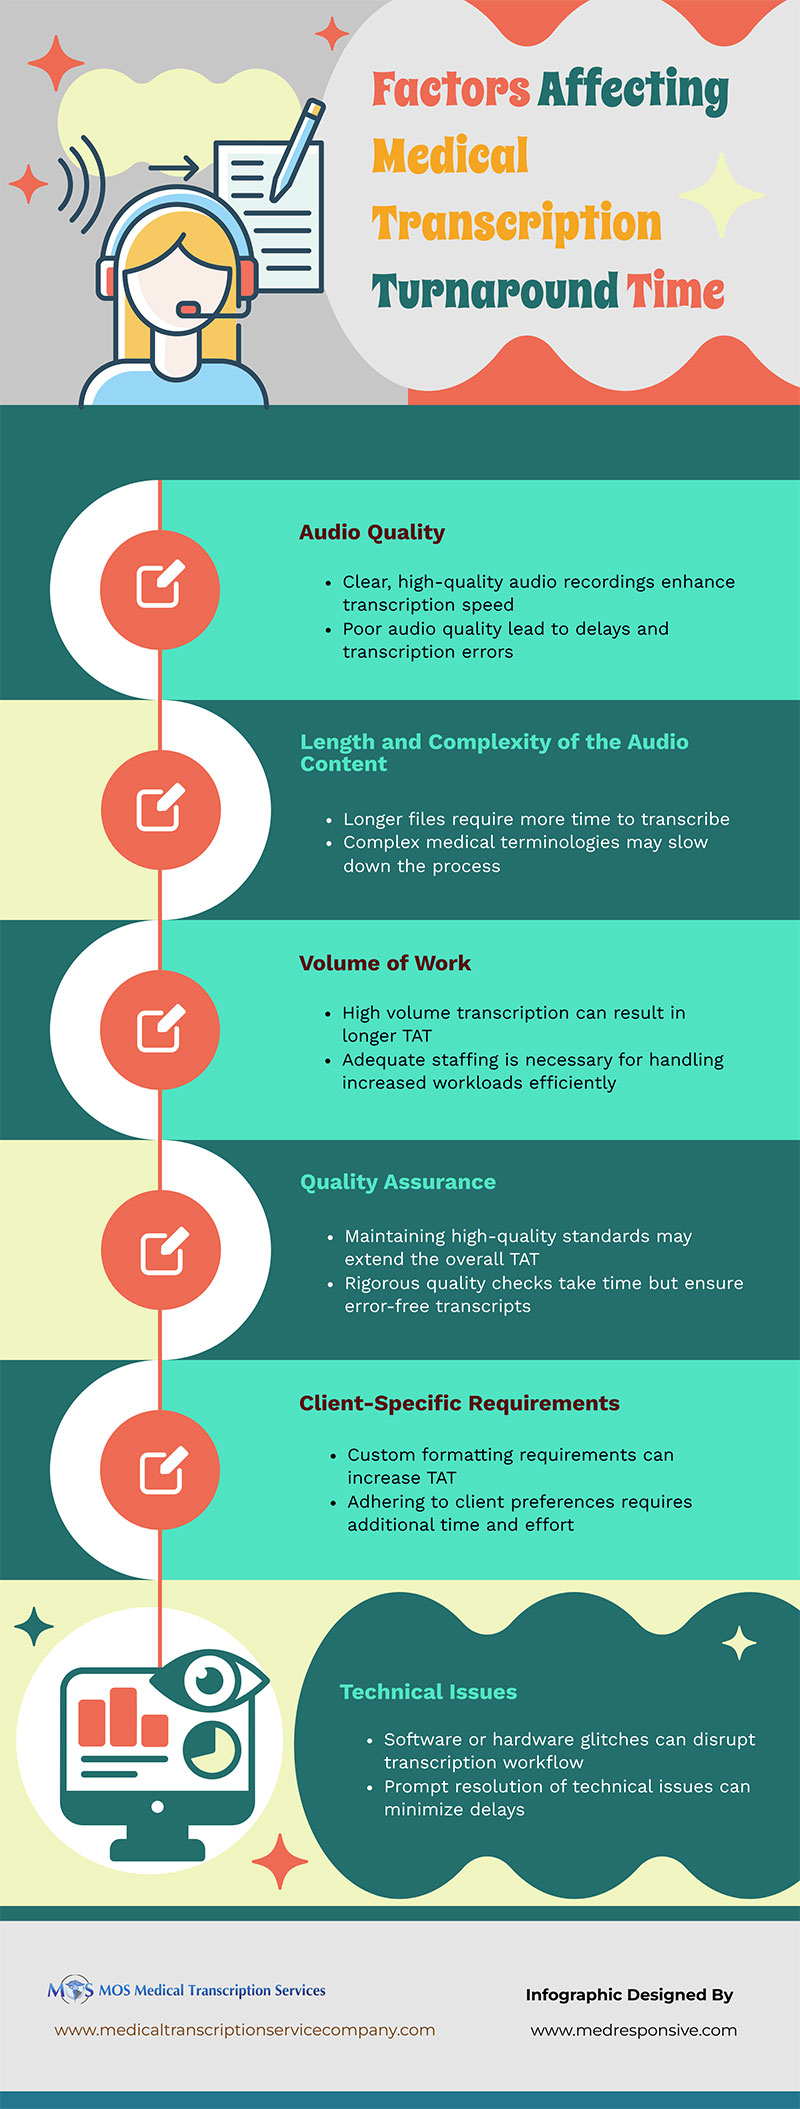 Key Factors That Influence Medical Transcription Turnaround Time [INFOGRAPHIC]